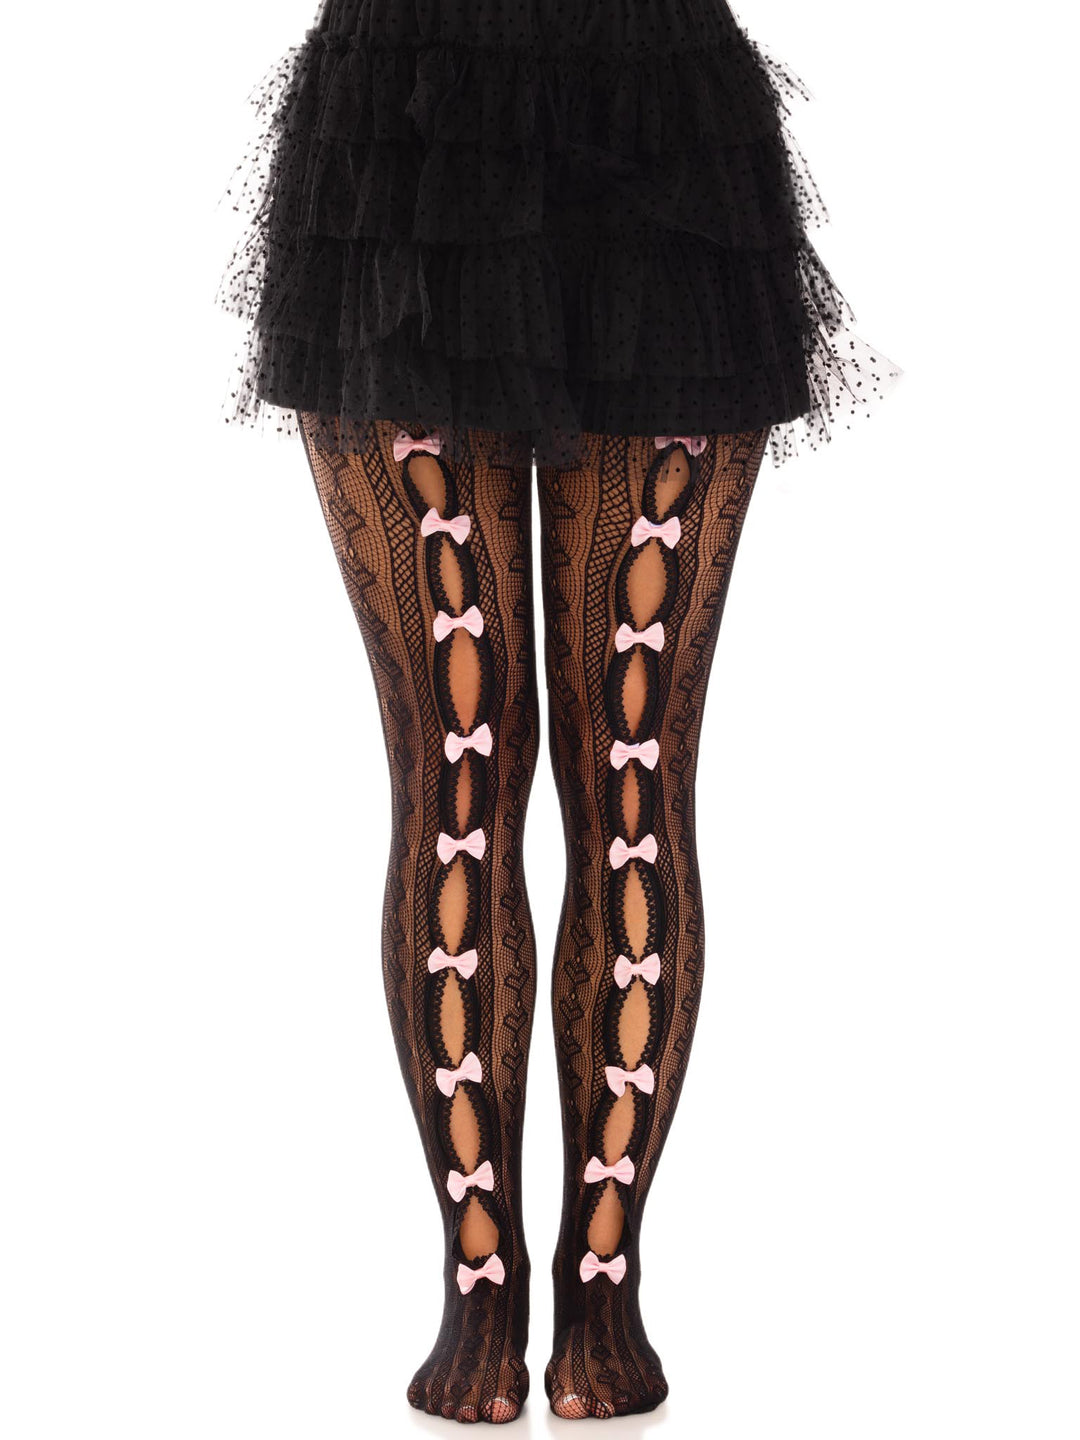 Sweetheart Striped Net Tights With Keyhole and  Mini Bow Detail - One Size - Black LA-9733BLKOS